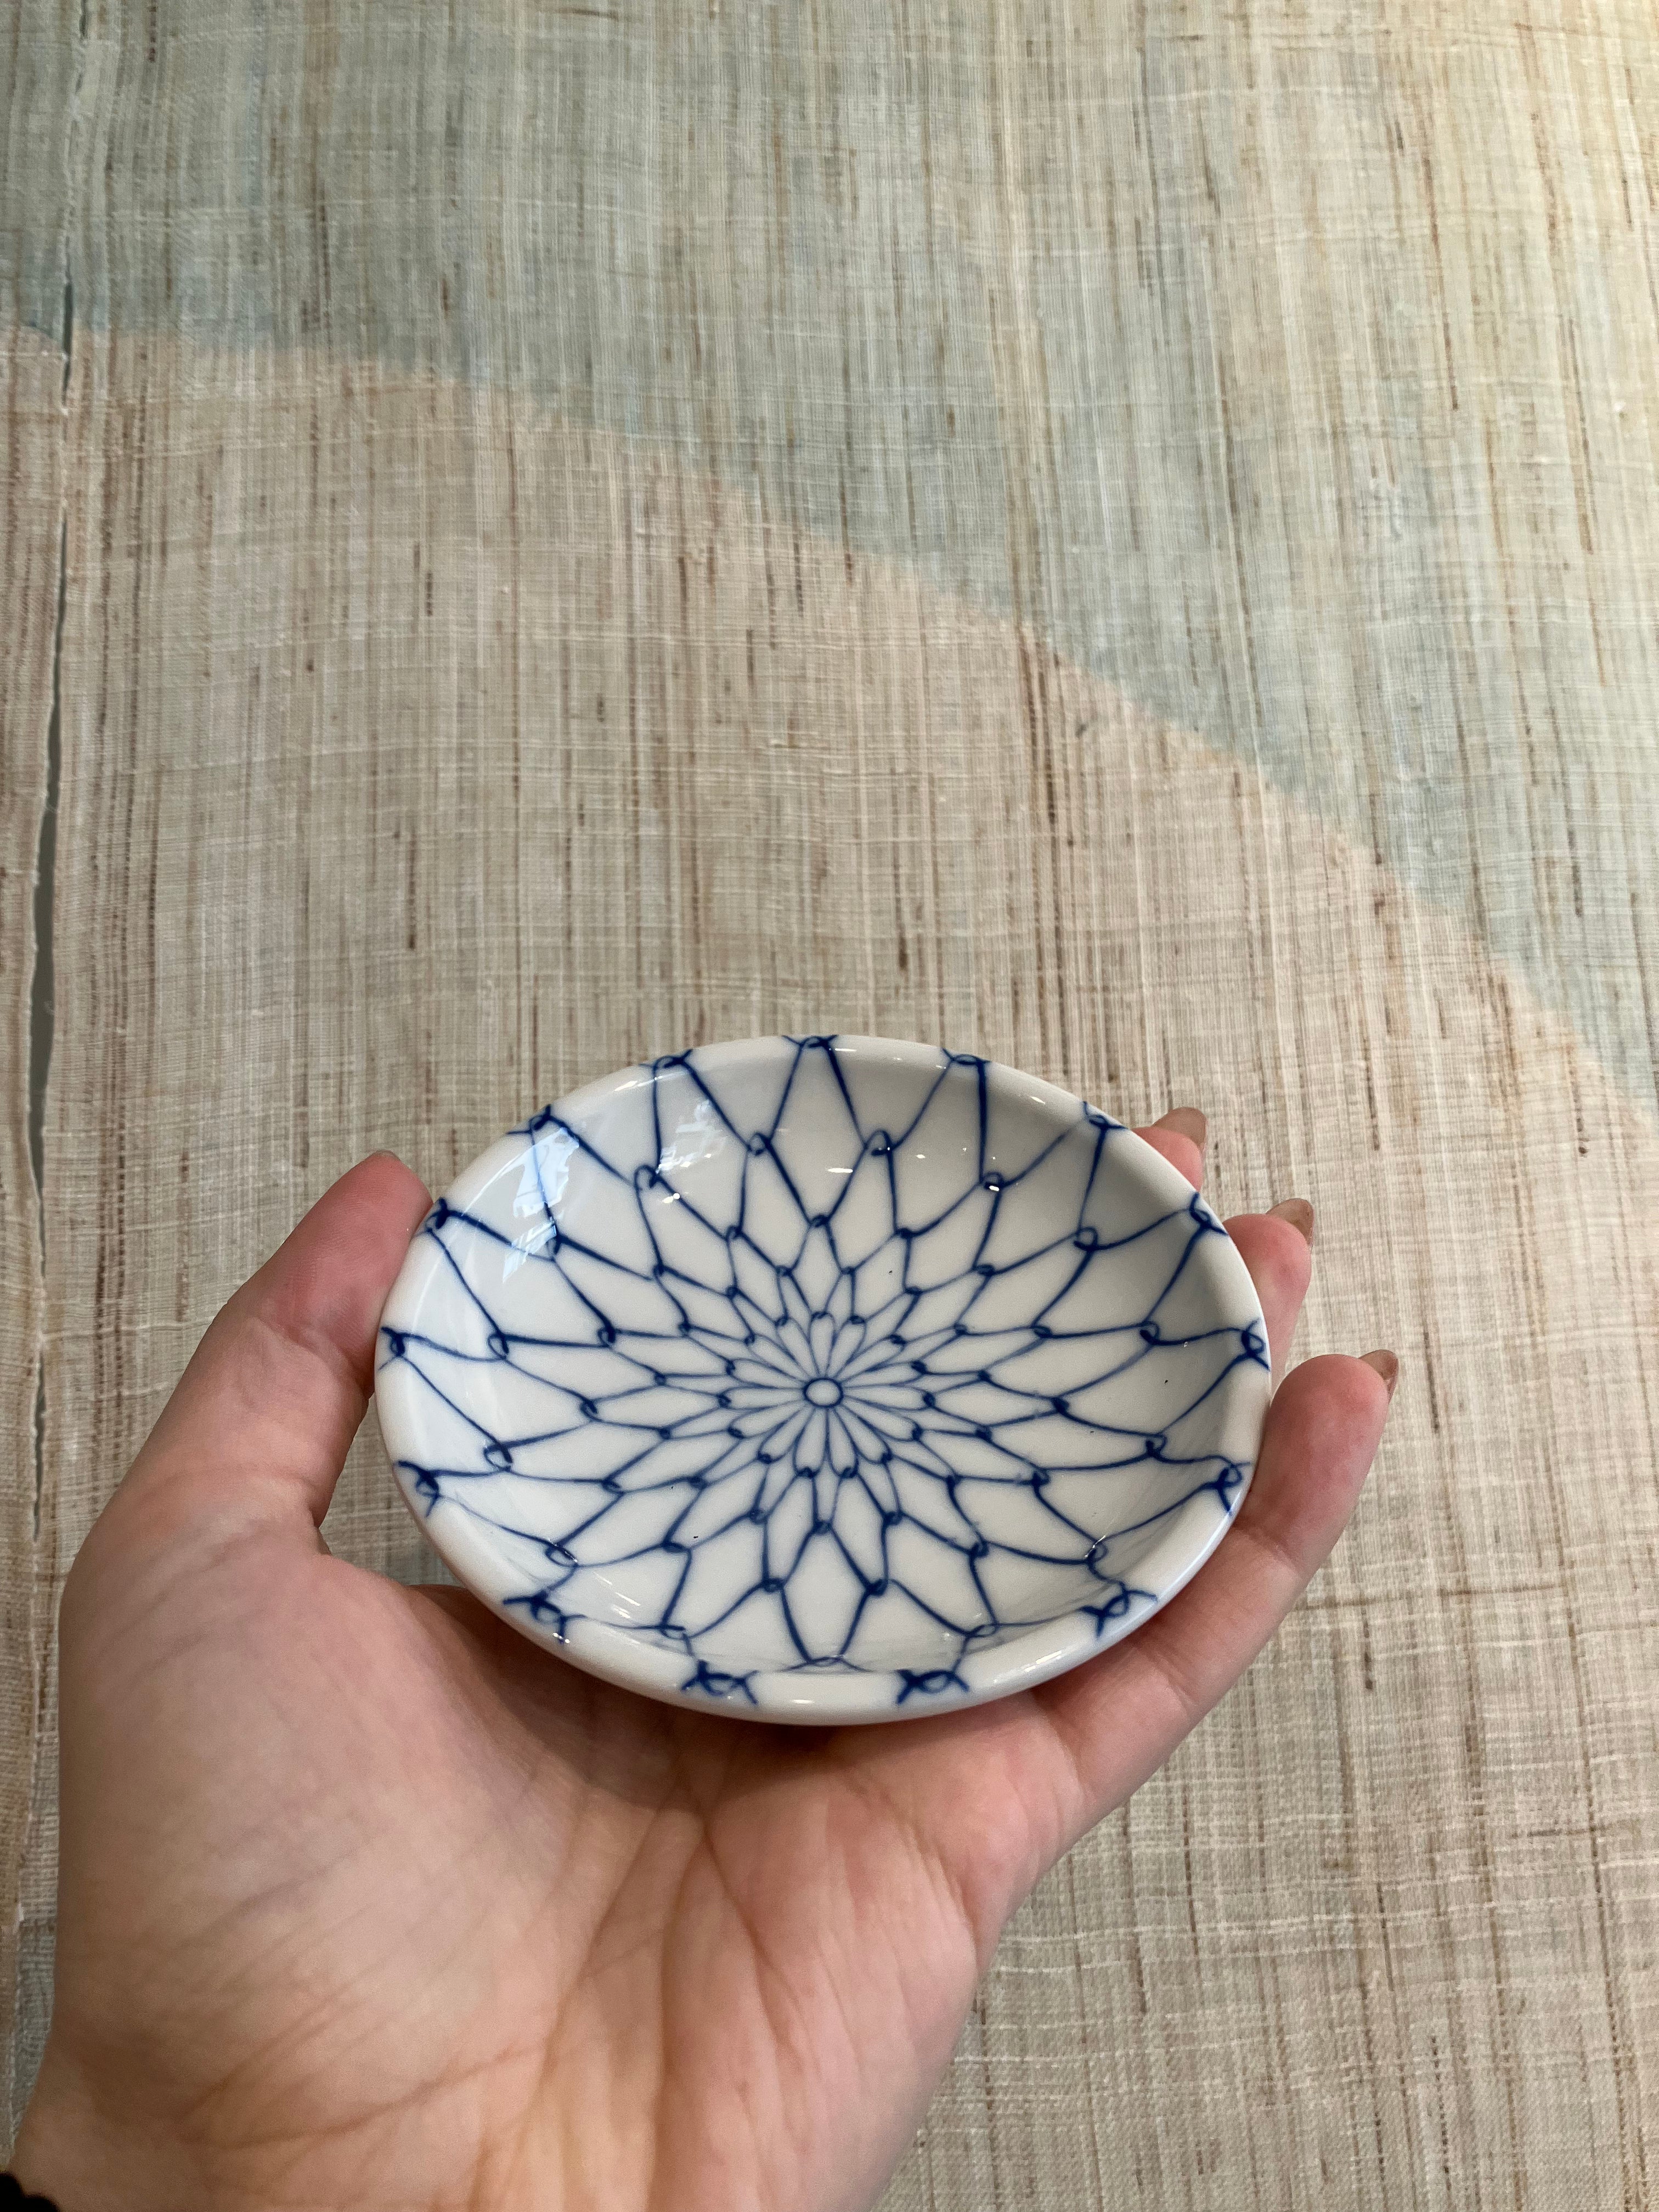 Small bowl with blue floral pattern